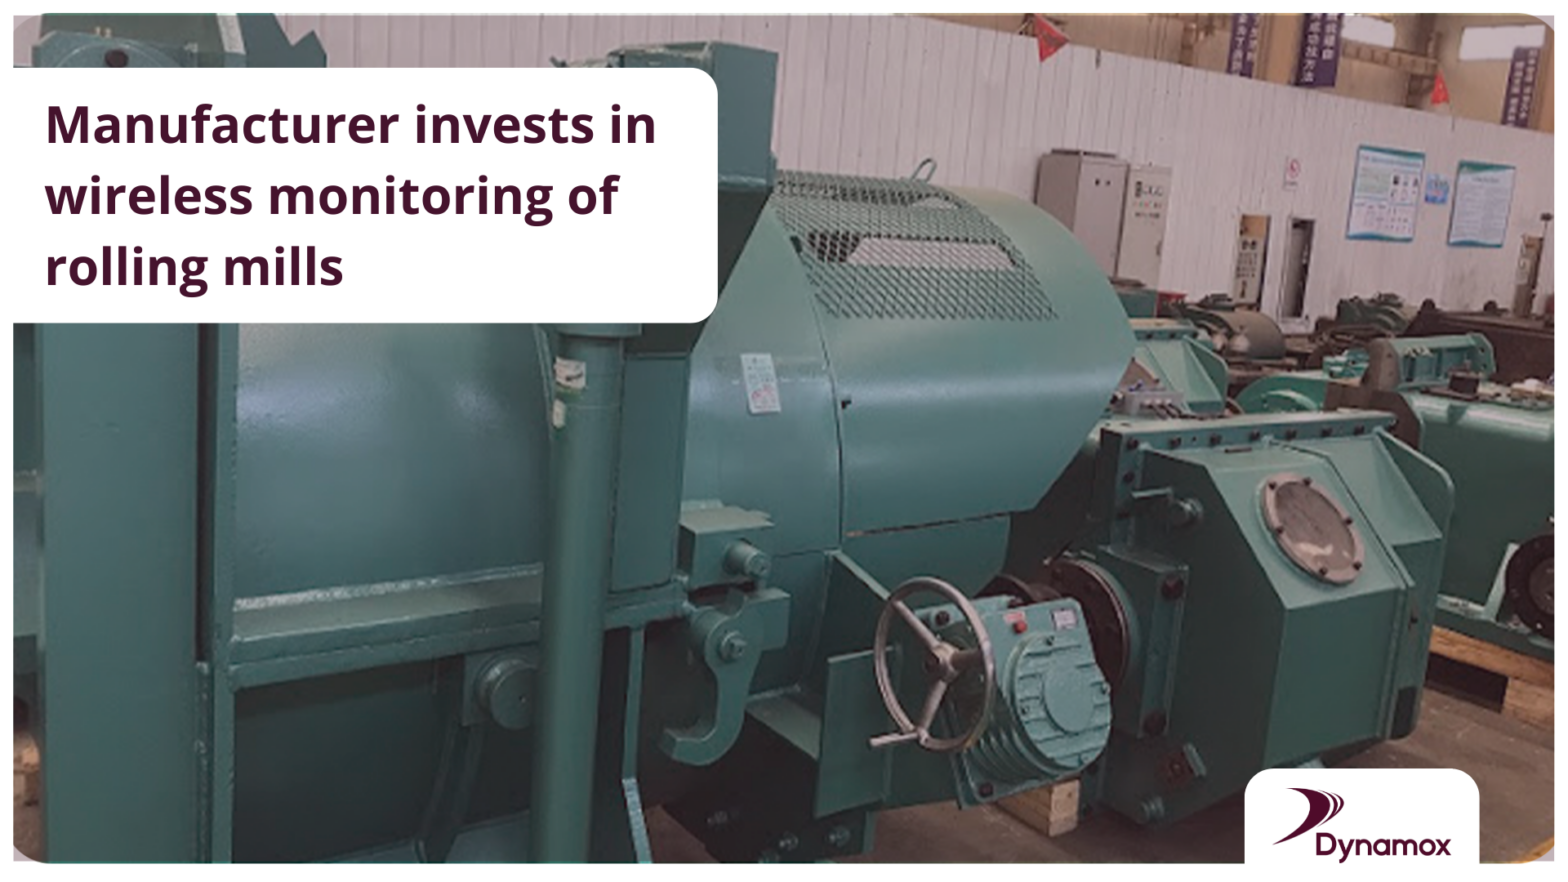 Manufacturer invests in wireless monitoring of rolling mills